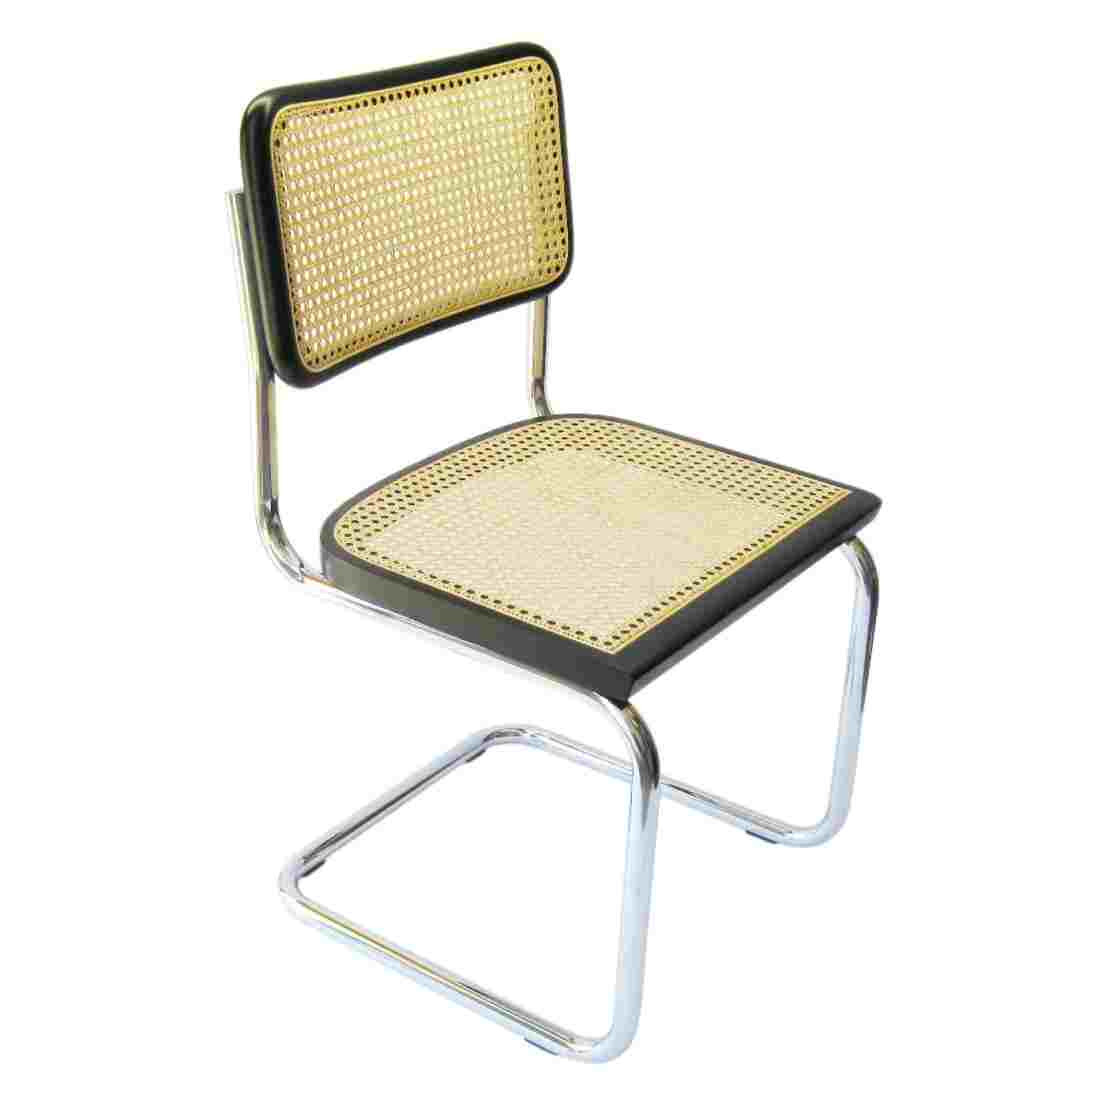 marcel breuer cesca cane chrome side chair in black rhamazoncom chairs replacement seats and backs wassily